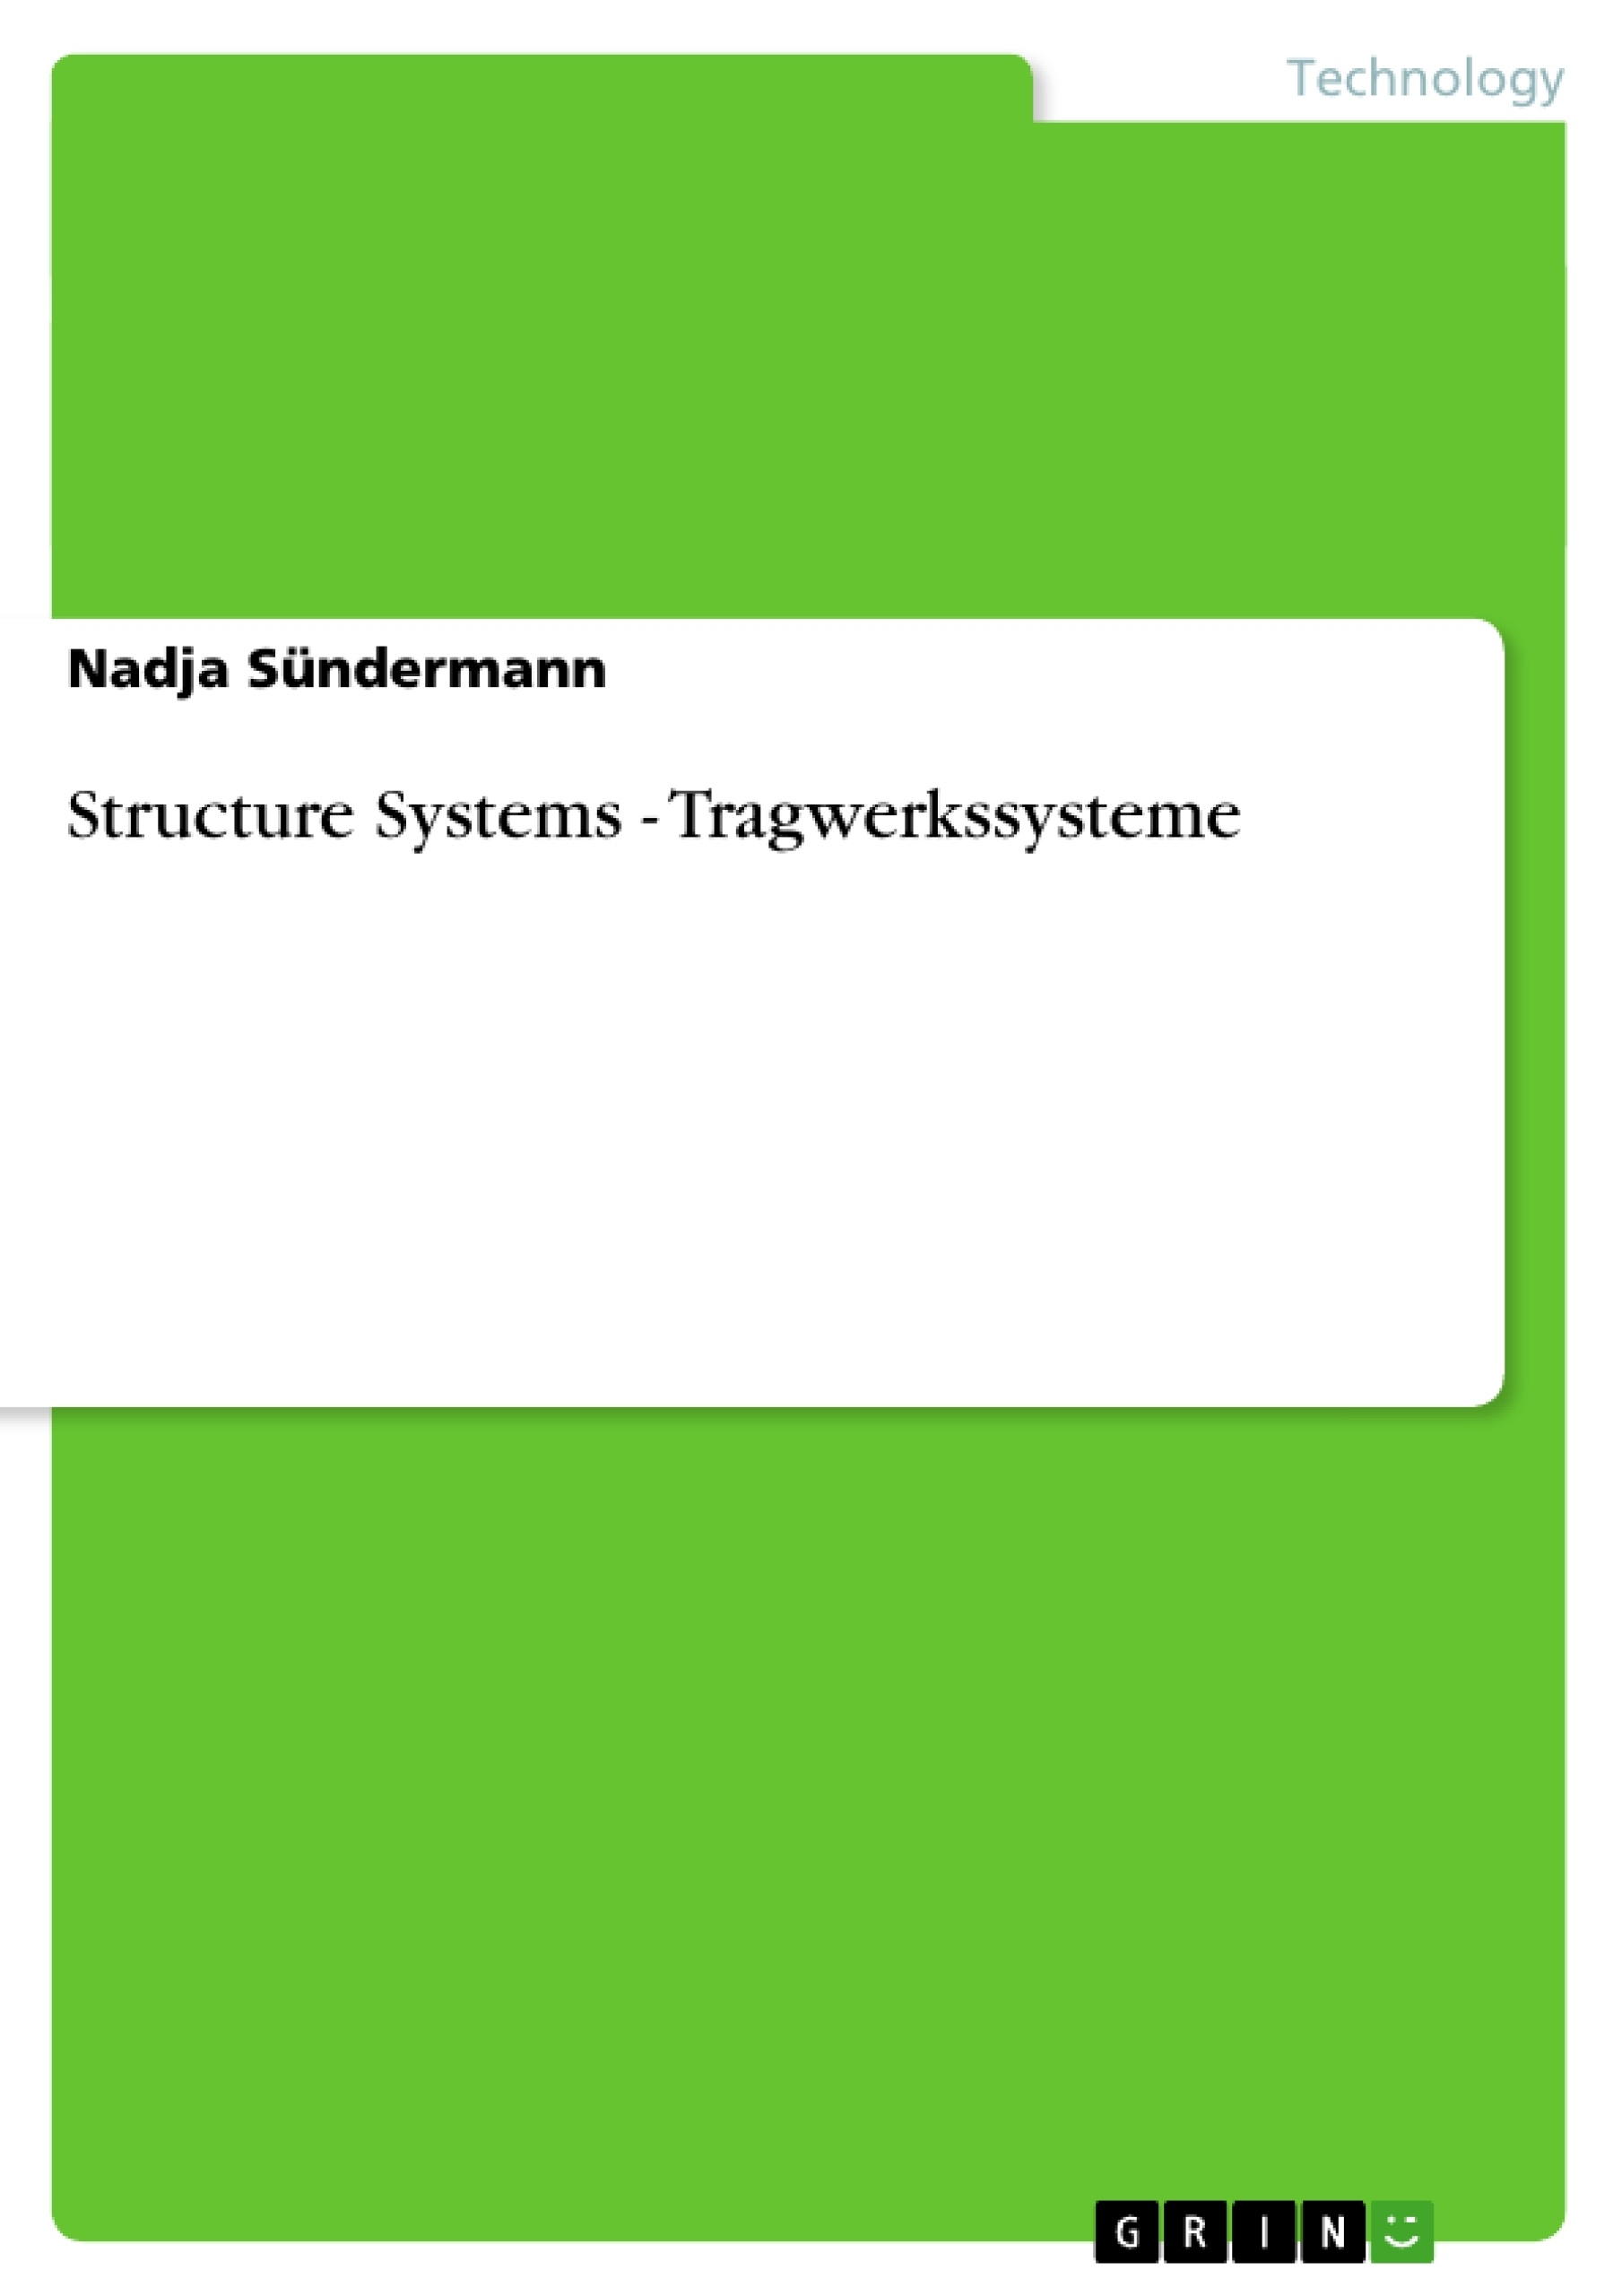 Título: Structure Systems - Tragwerkssysteme